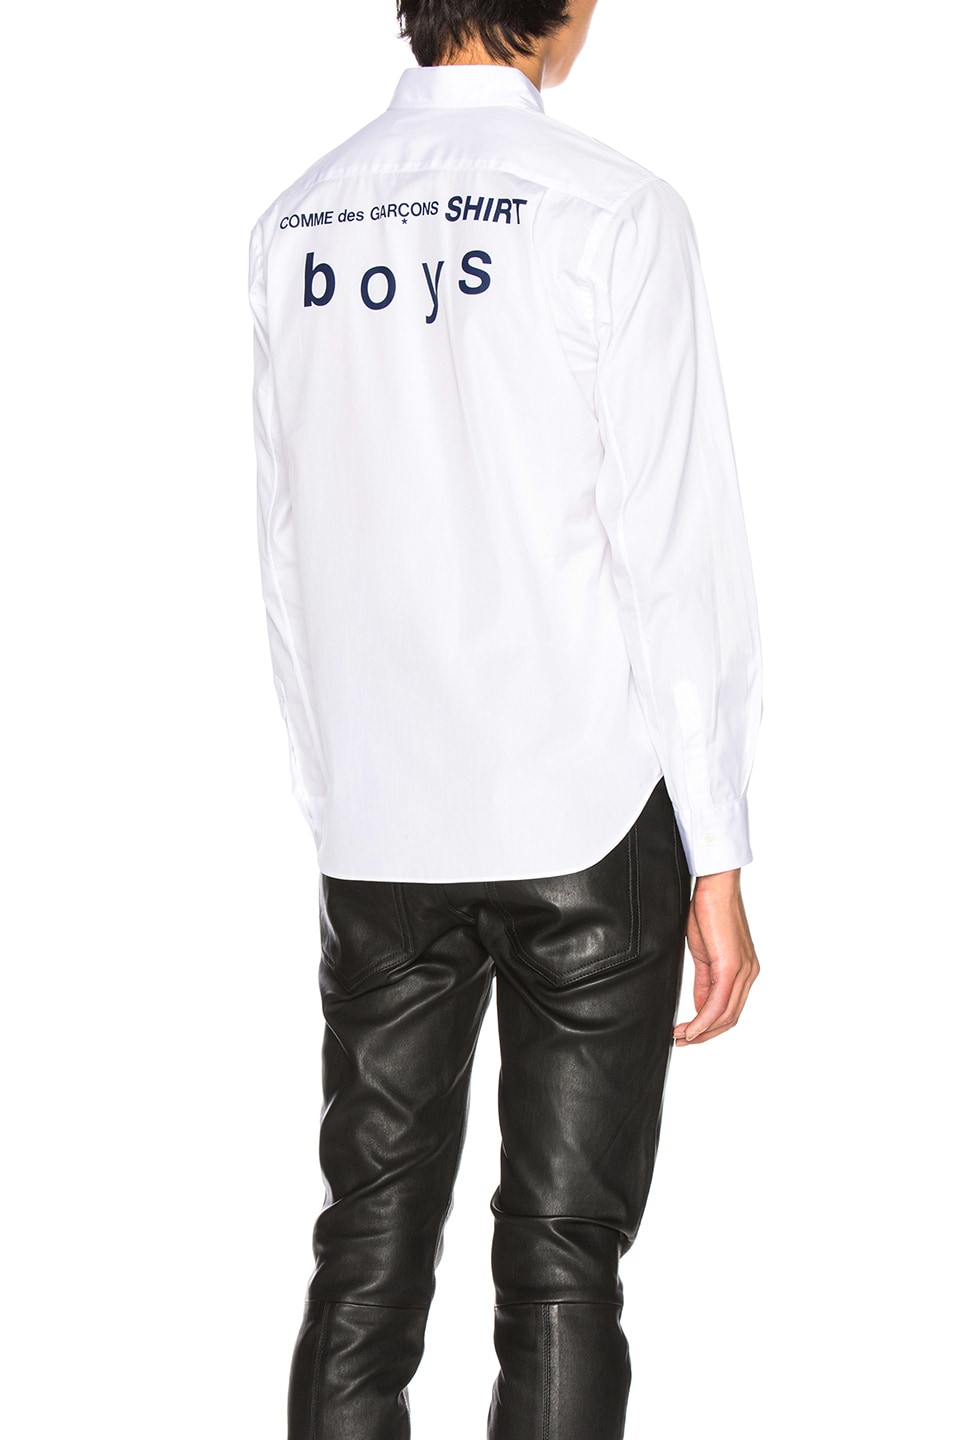 Image 1 of COMME des GARCONS SHIRT Boys Shirt in White